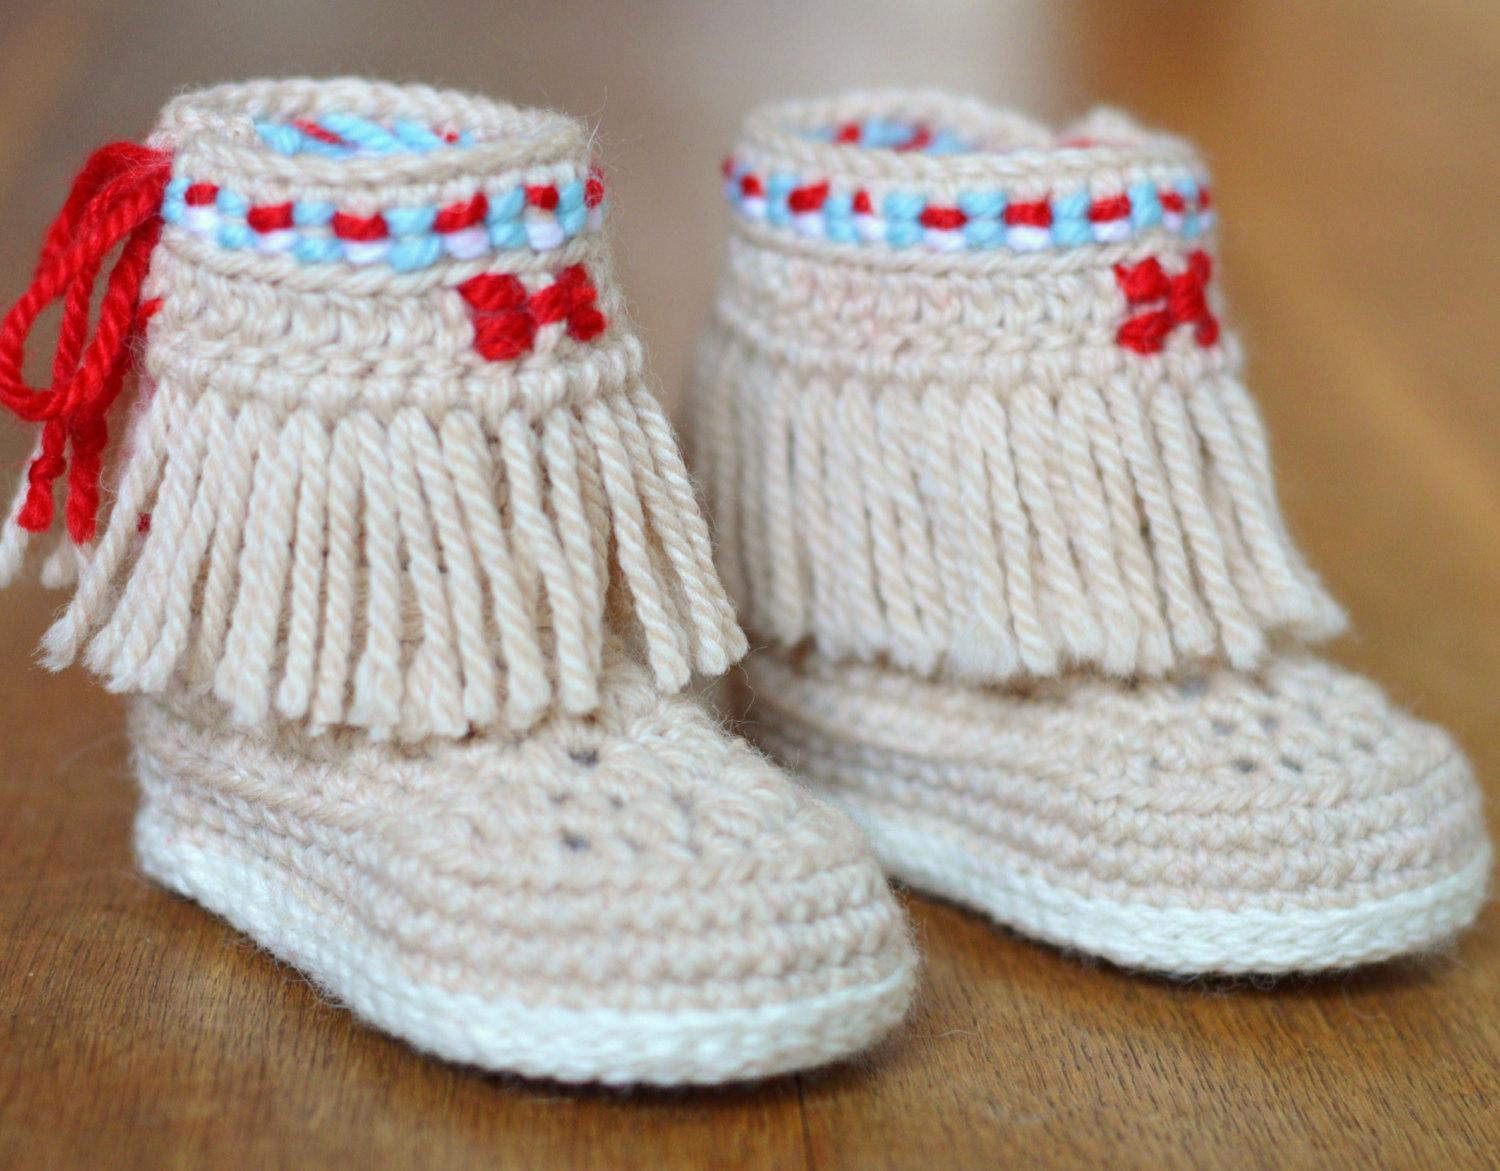 Moccasin Crochet Pattern Crochet Pattern Ba Moccasin Booties With Fringes Sizes 3 6 Etsy